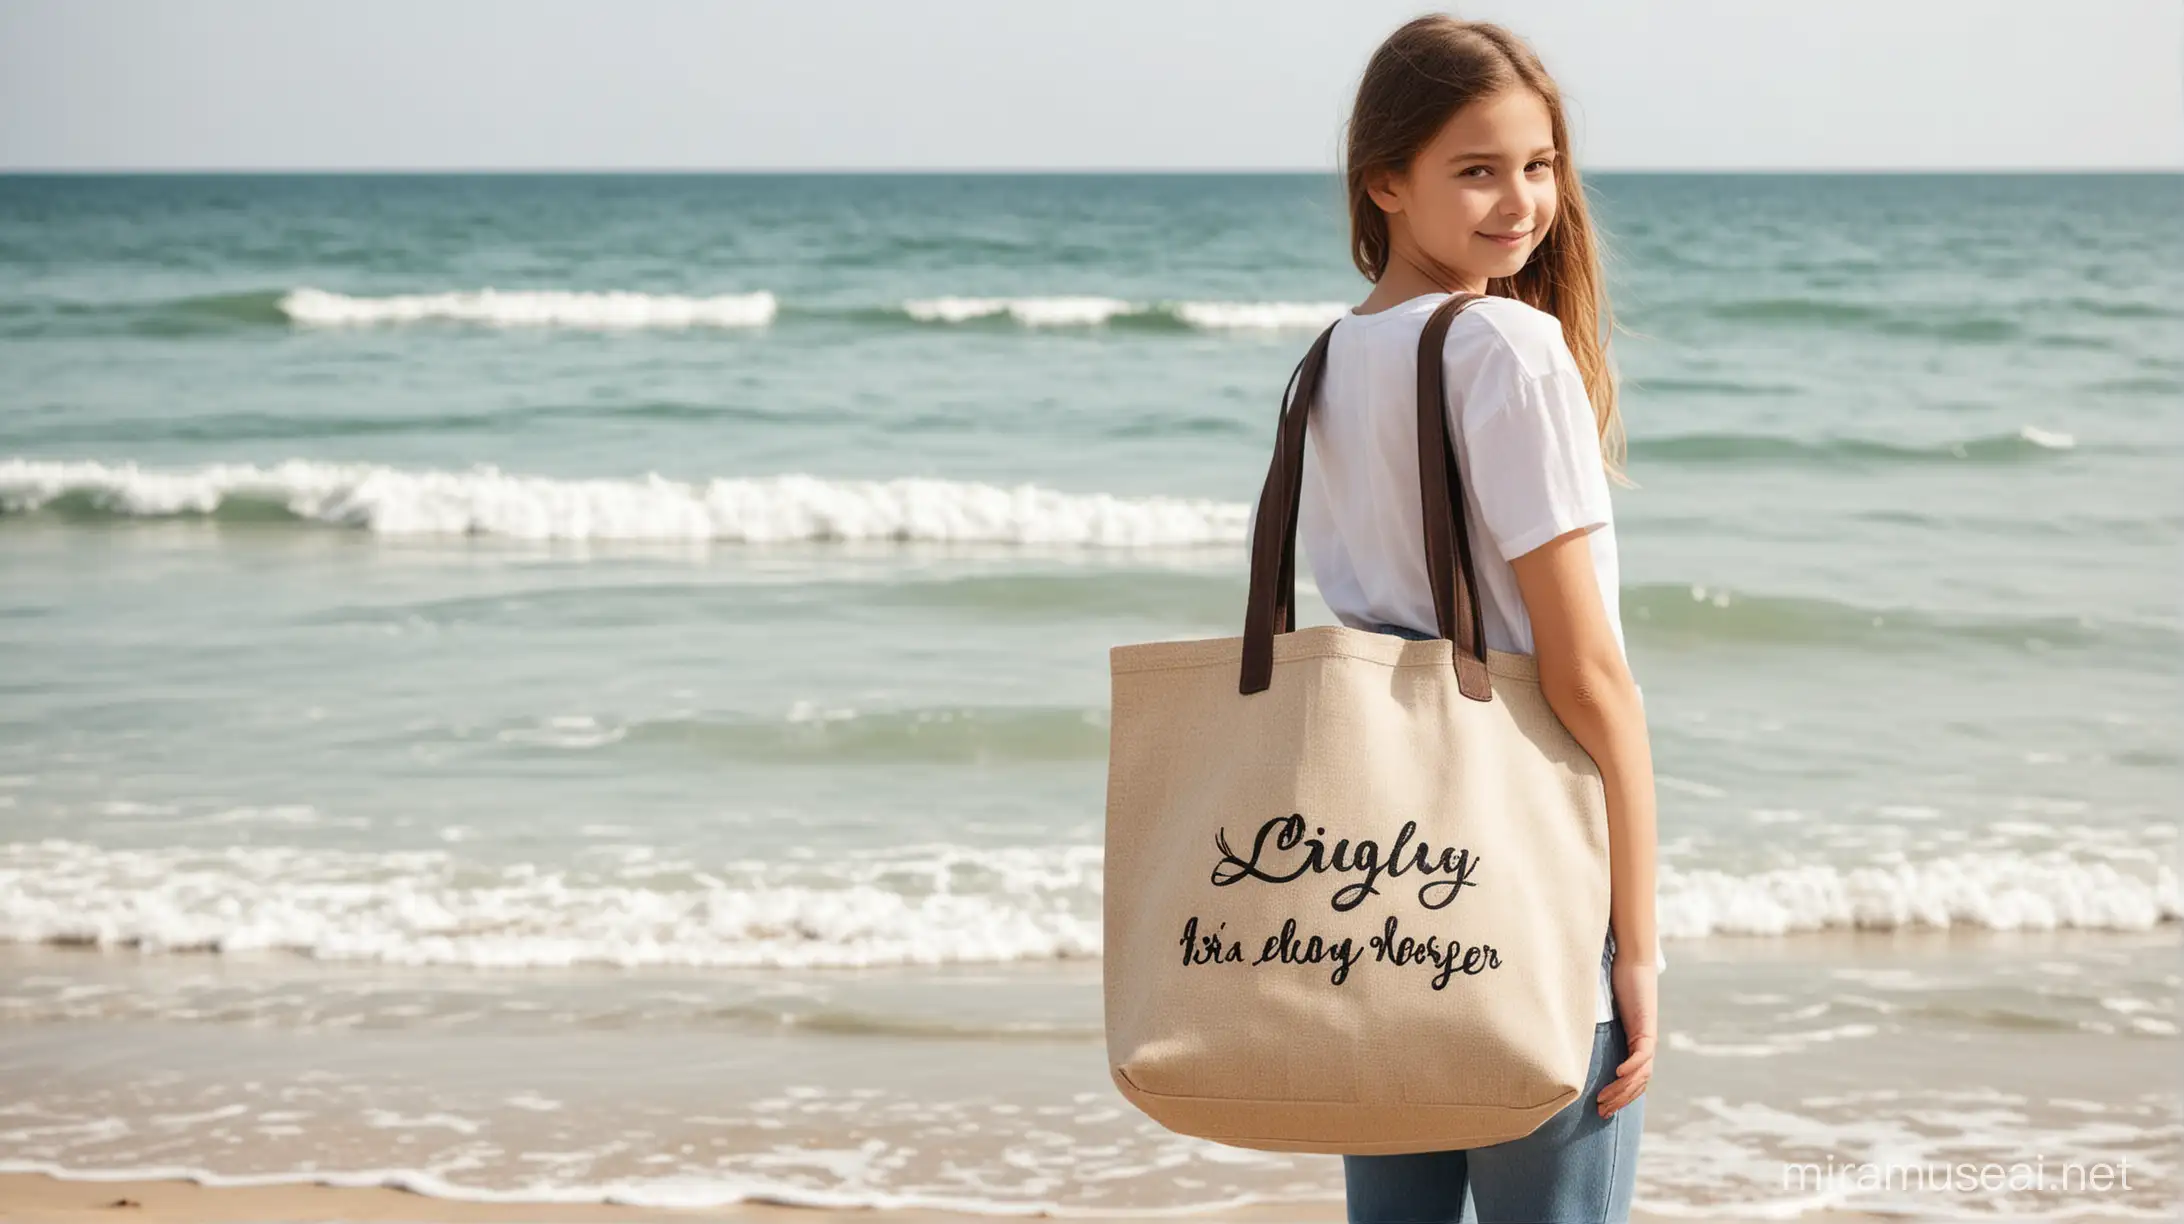 Young Girl 10-12 years old Carrying Tote Bag stands on the beach by the sea photo mockup